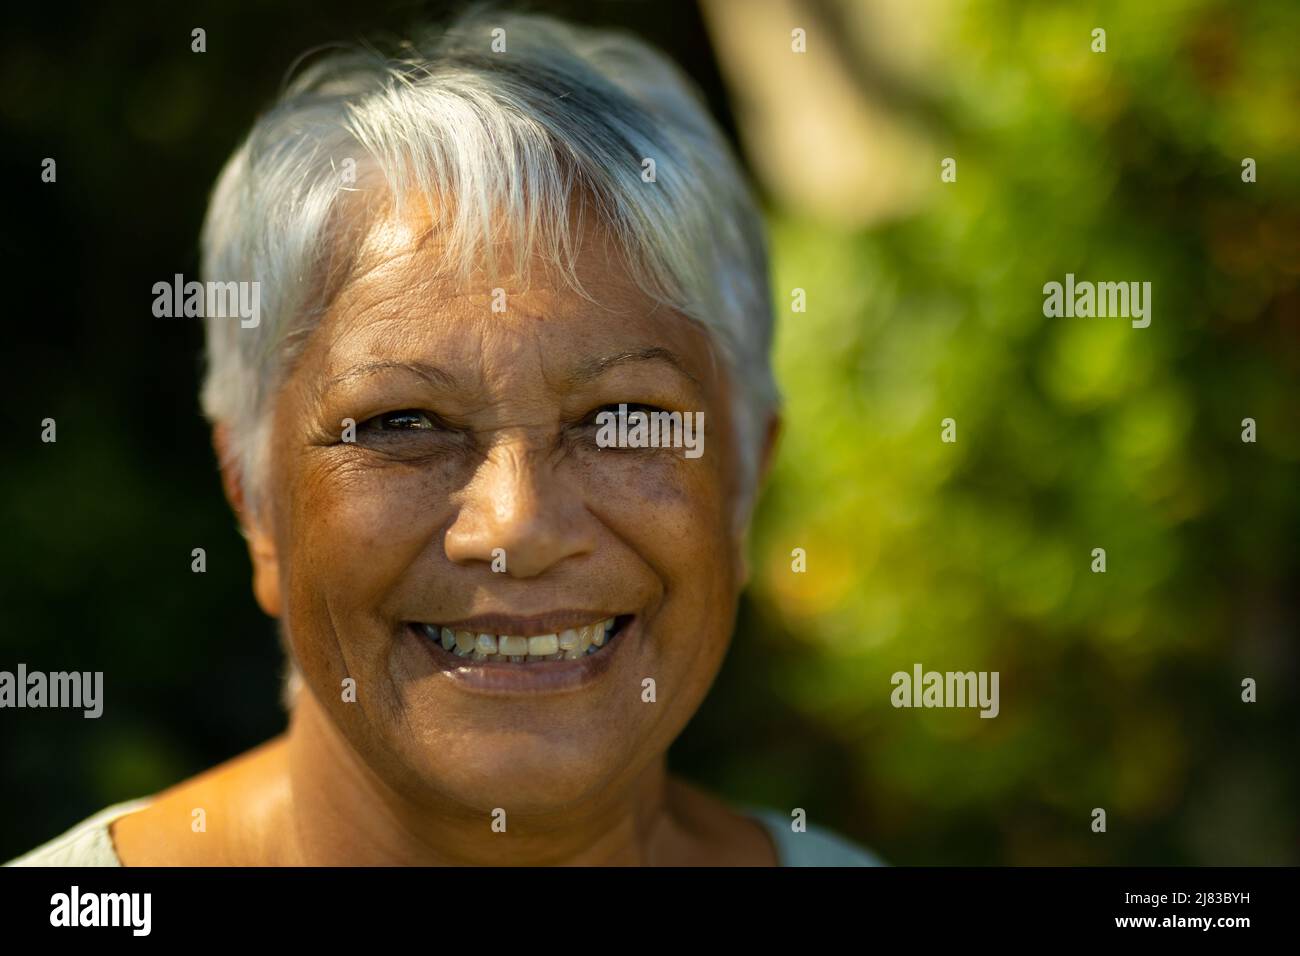 Close-up portrait of smiling biracial senior woman with short gray hair in park Stock Photo